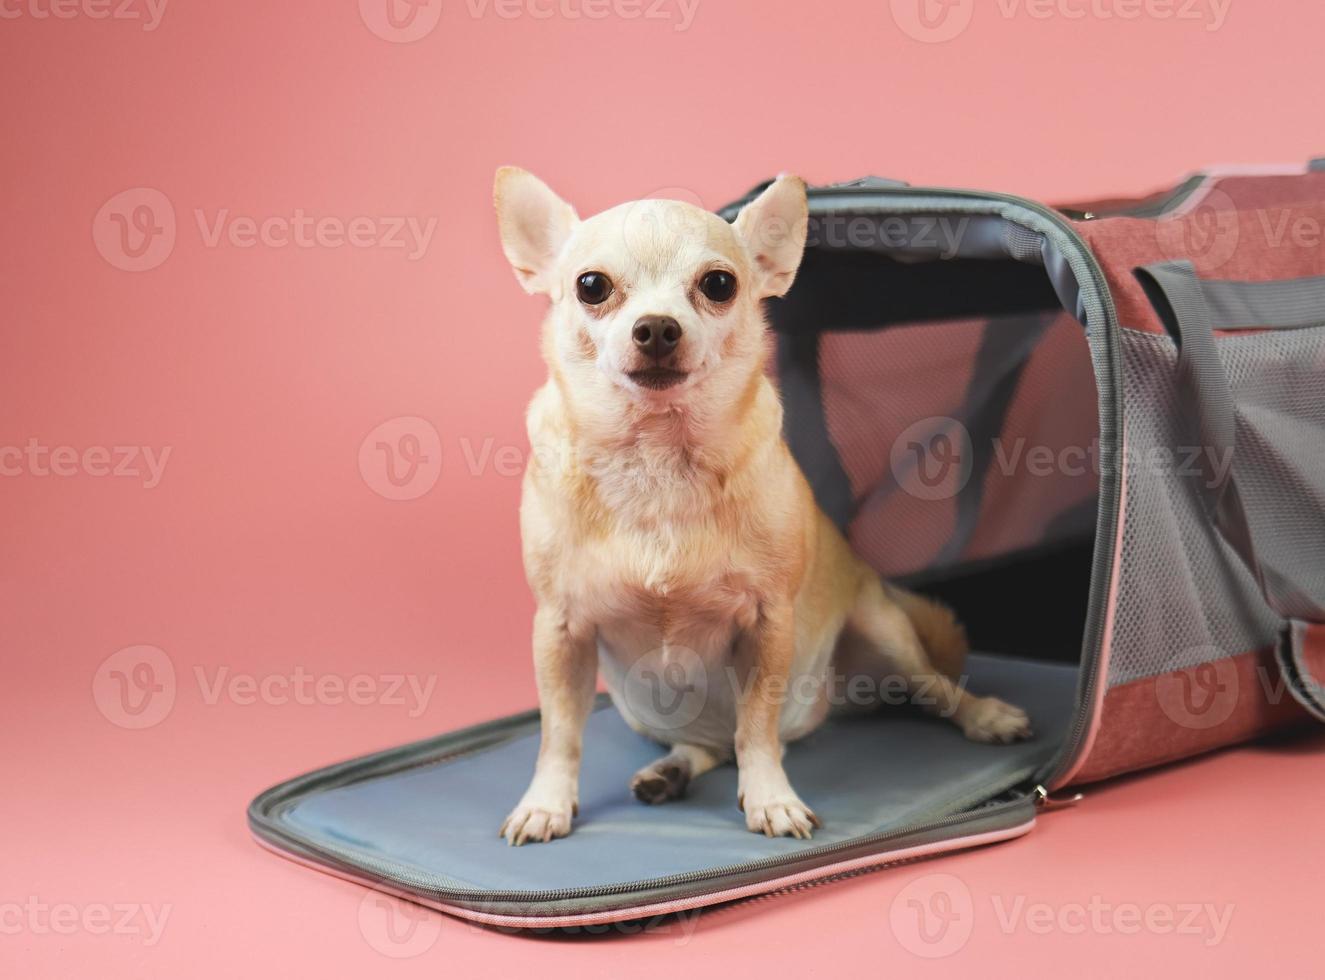 brown chihuahua dog sitting and looking at camera in front of  traveler pet carrier bag on pink  background with copy space.  Safe travel with animals. photo